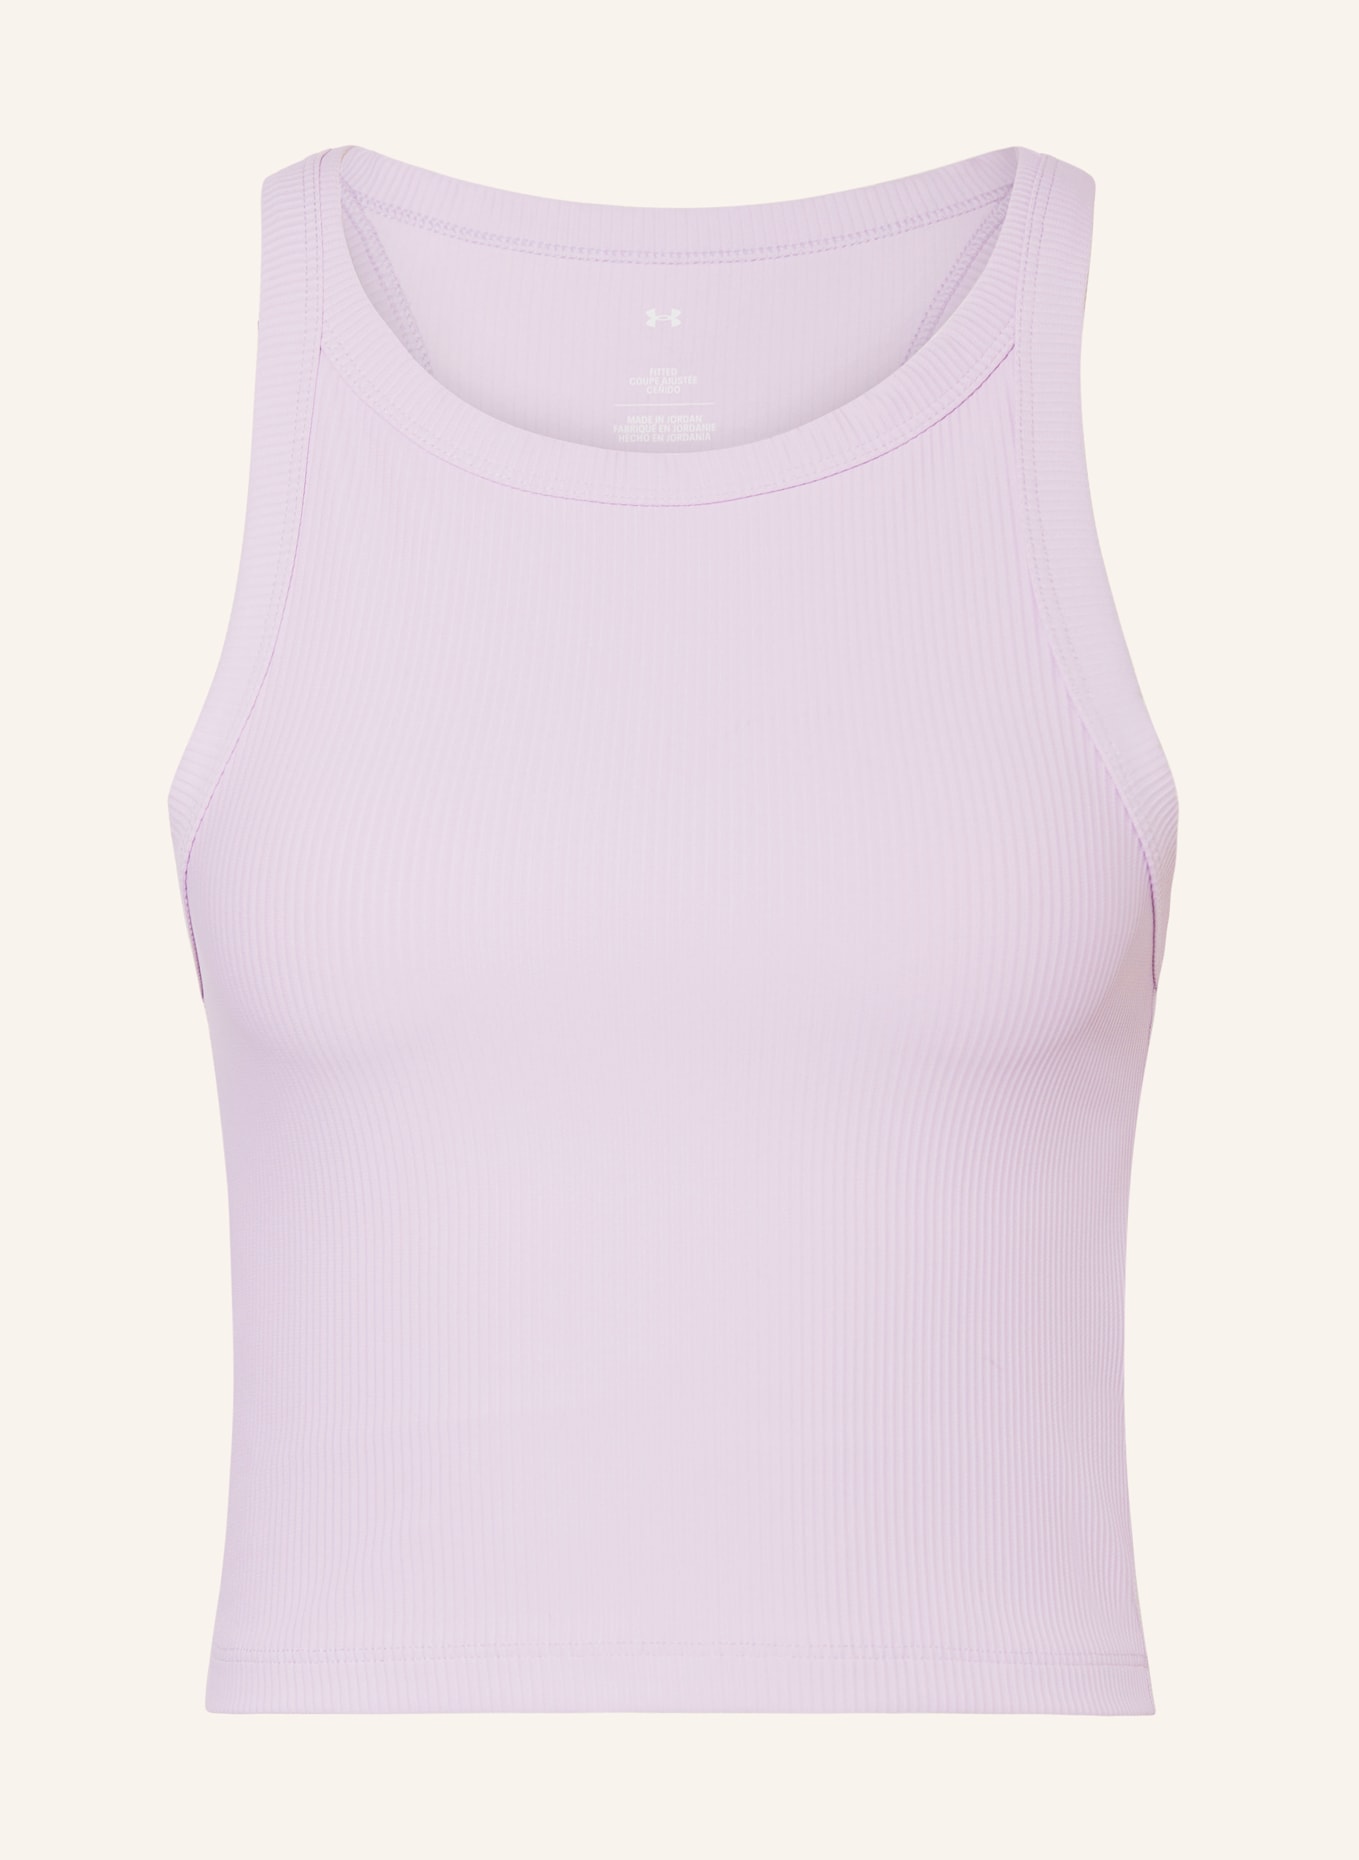 UNDER ARMOUR Cropped top MERIDIAN, Color: LIGHT PURPLE (Image 1)